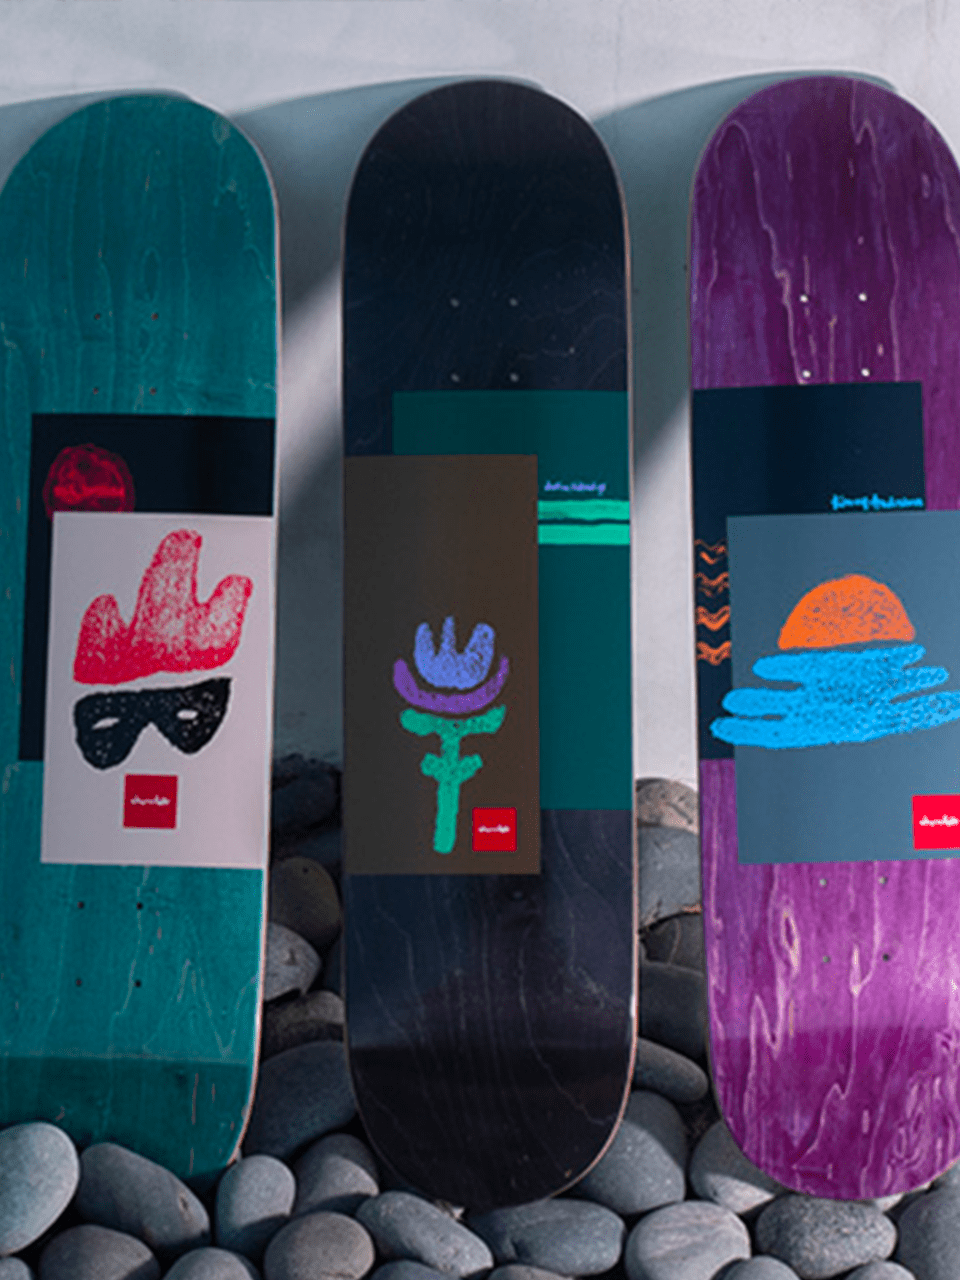 The Last Supper skateboard by Musketon - The Daily Board